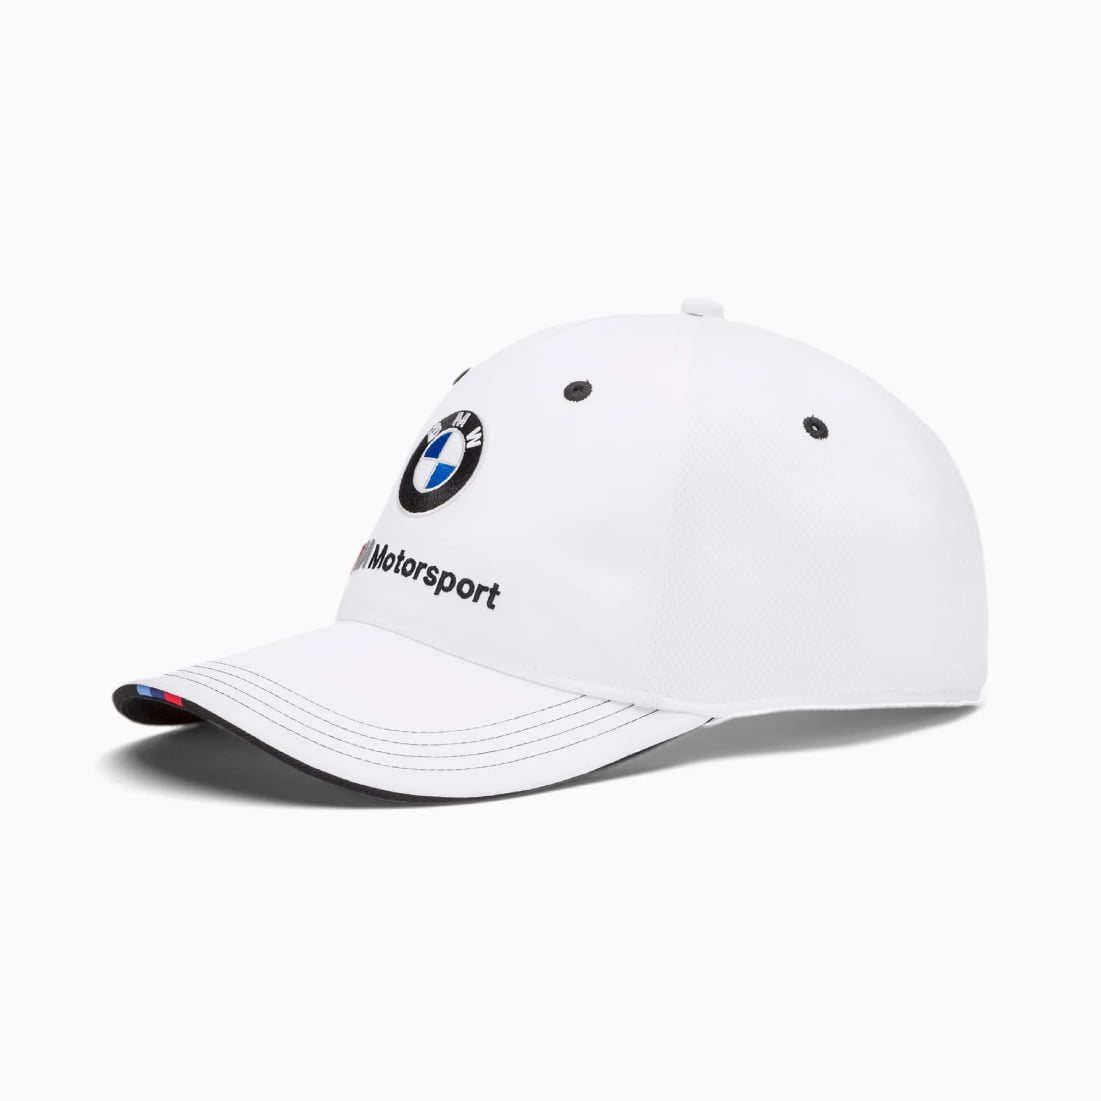 Racing Logo Embroidered BMW M Baseball Cap Hat Cotton Summer Snapback For Men's